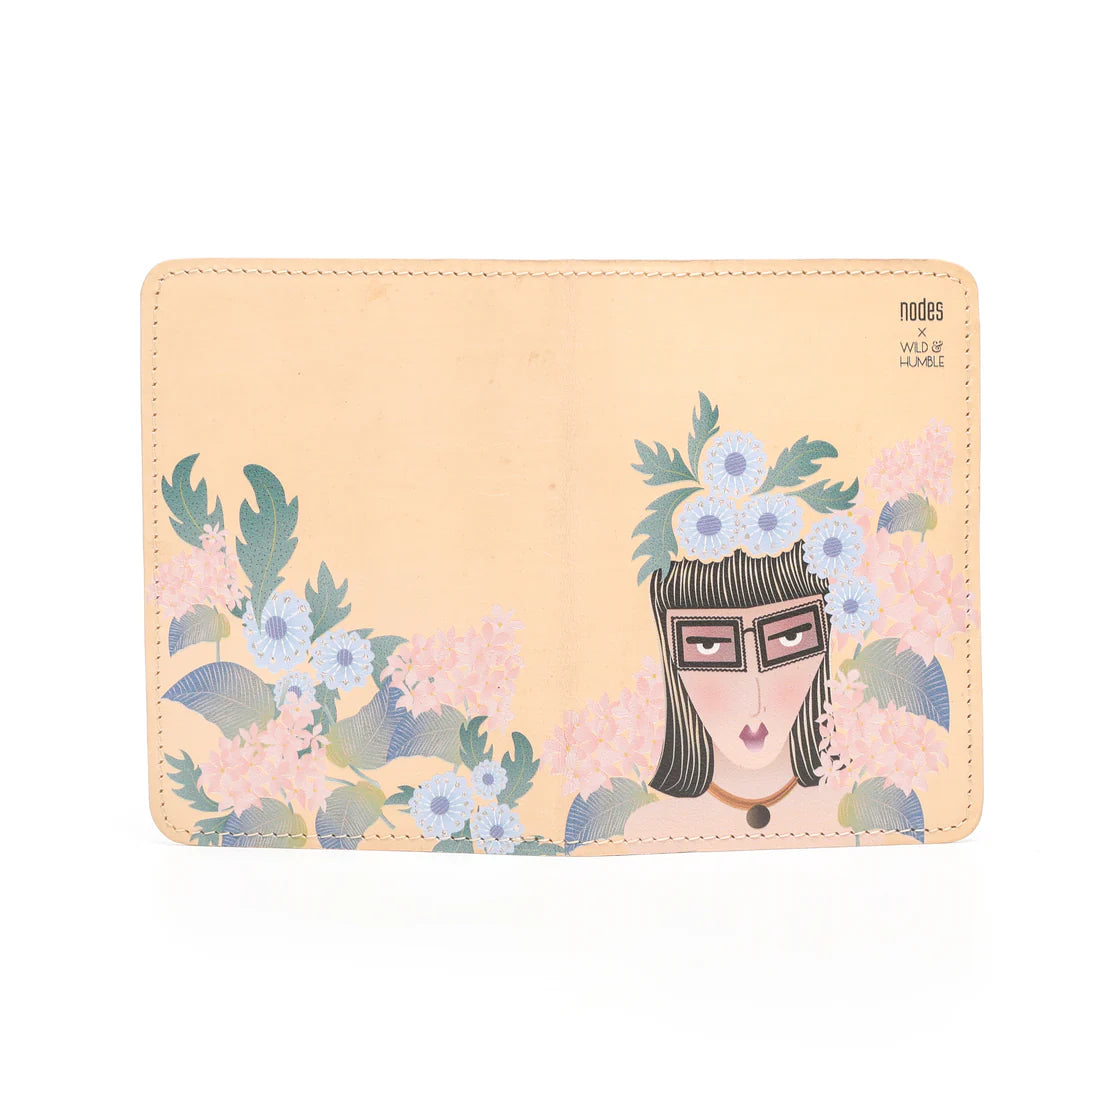 Beige color Passport cover with beautiful painting.